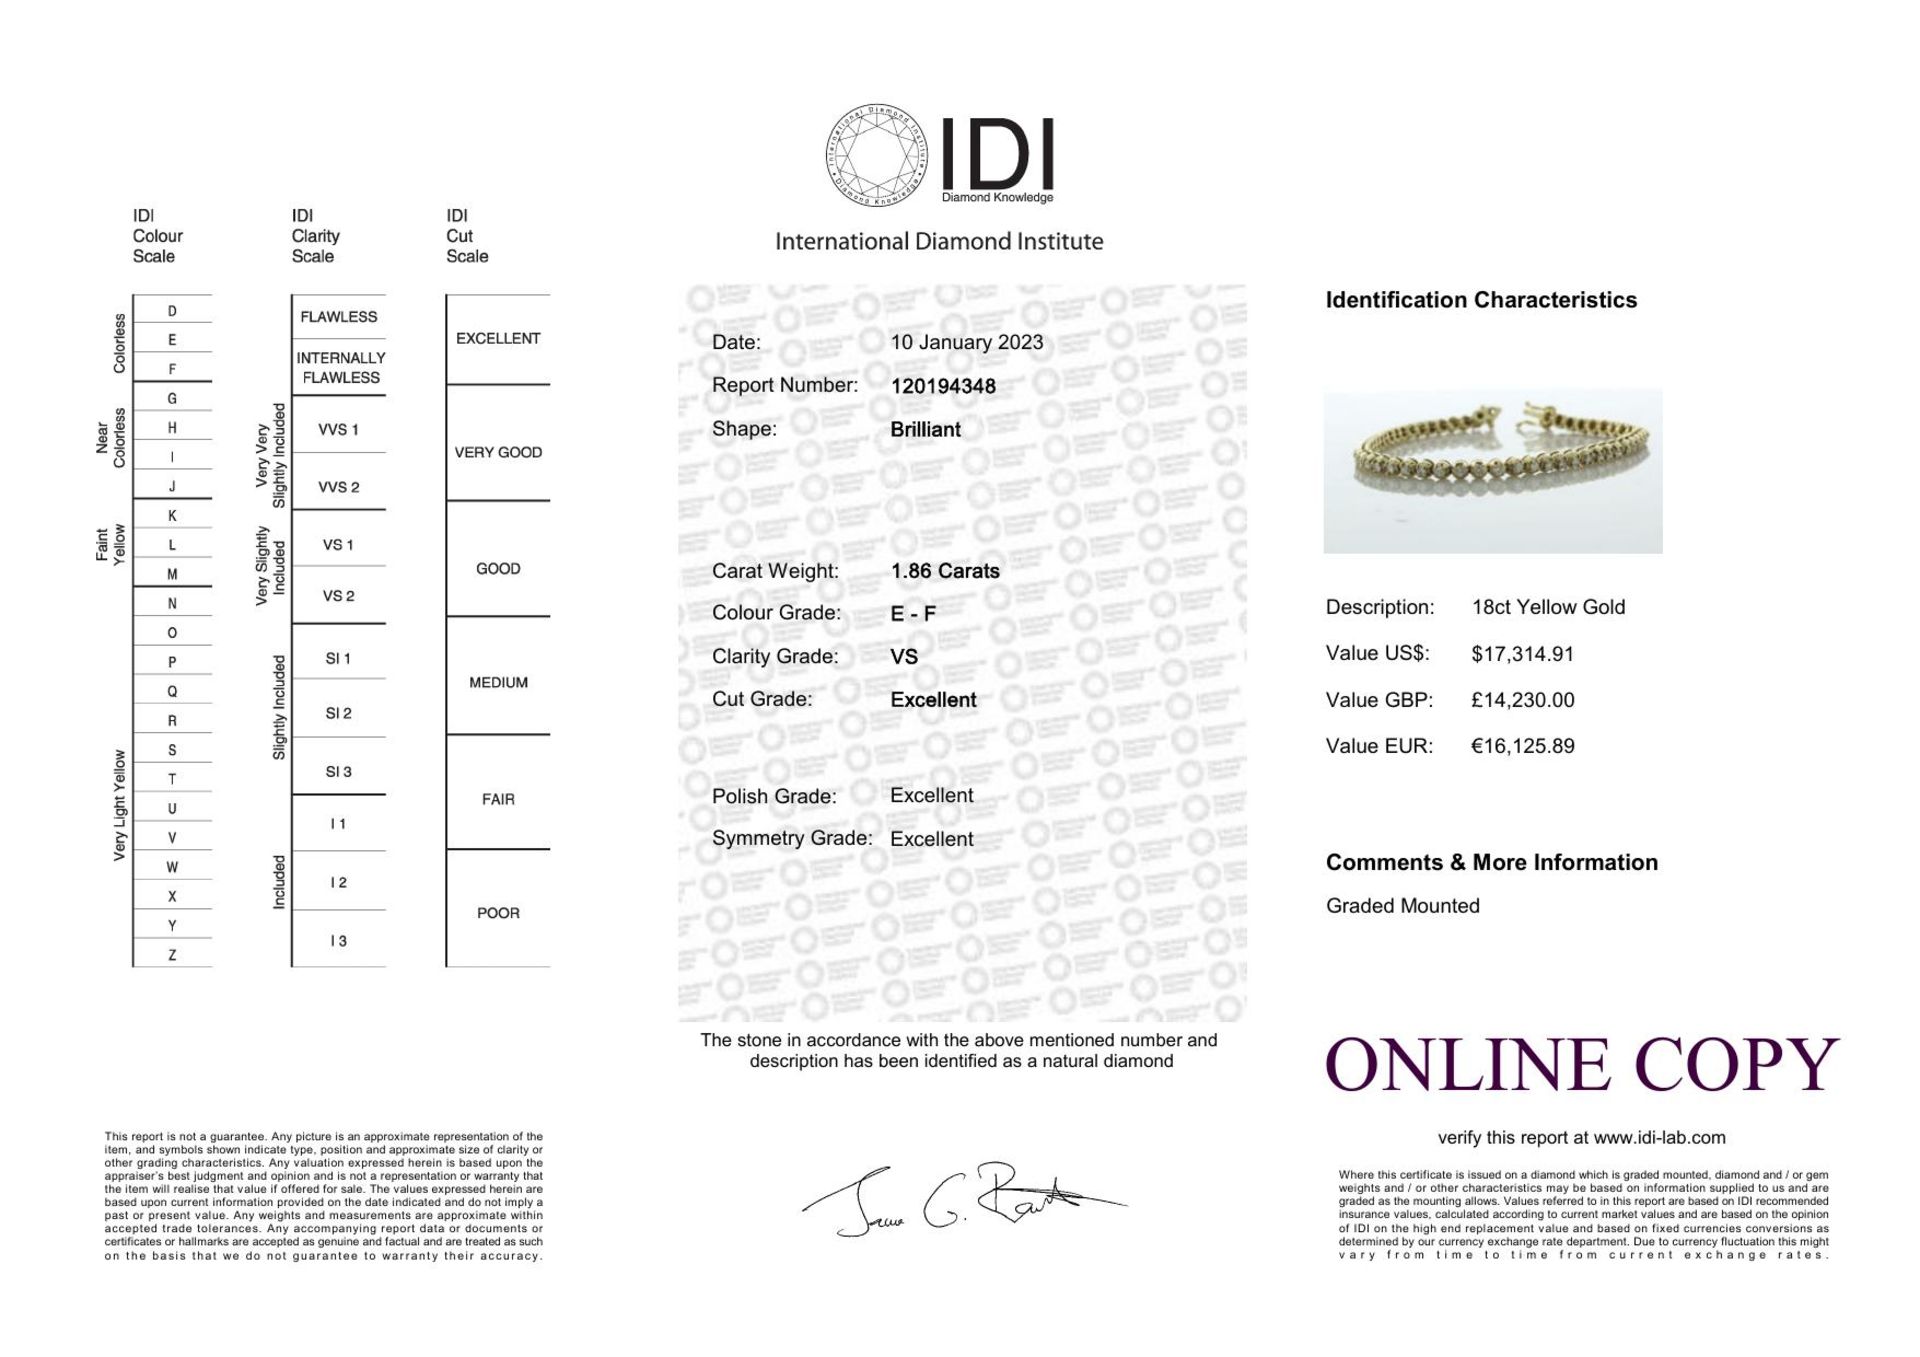 18ct Yellow Gold Tennis Diamond Bracelet 1.86 Carats - Valued By IDI £14,230.00 - Fifty three - Image 5 of 5